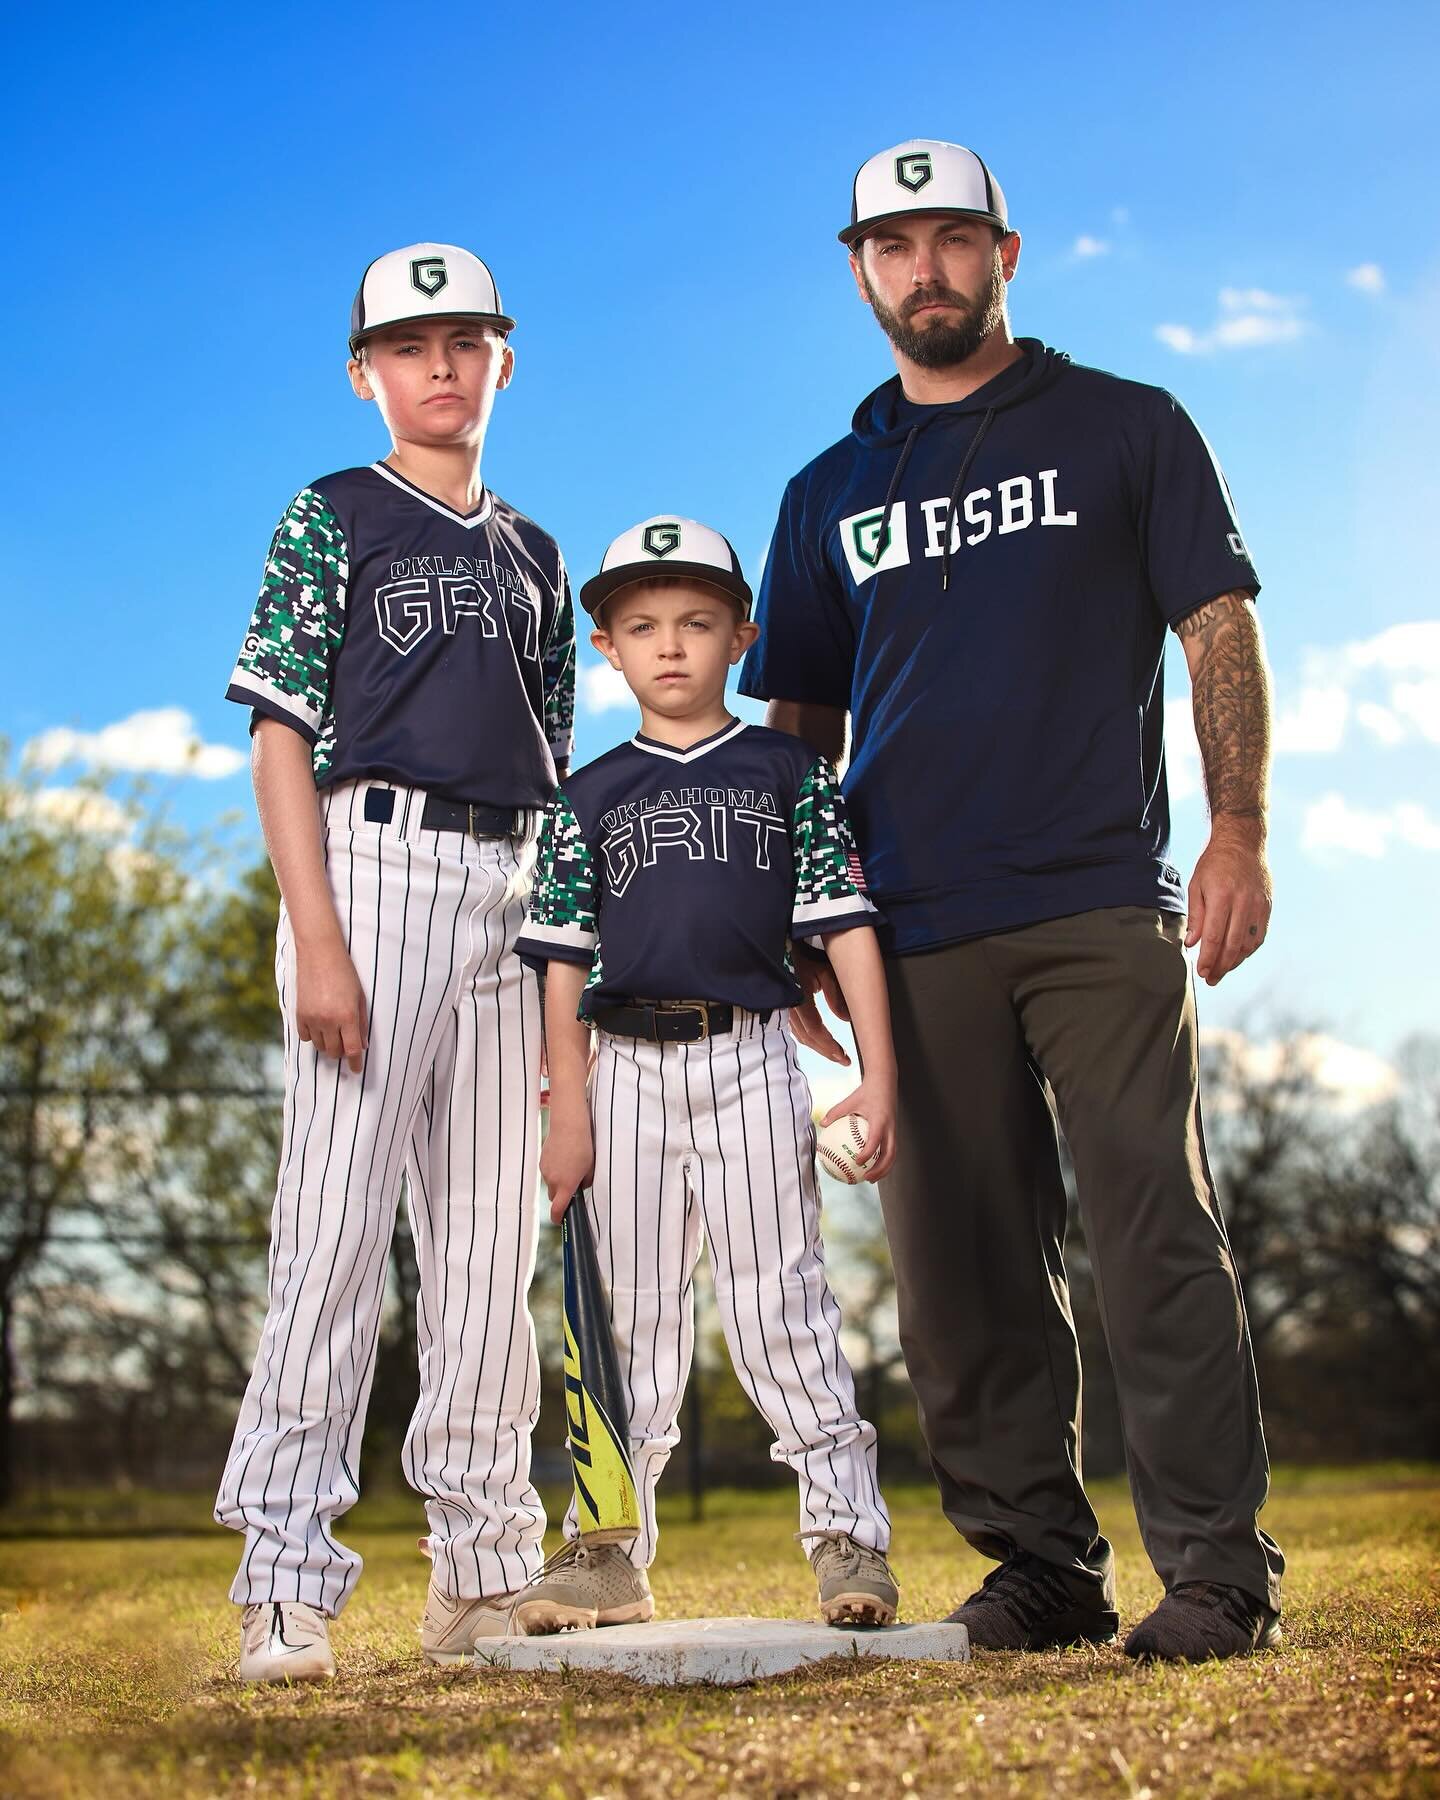 Spring time means Baseball! Booking OKC local teams all Spring &amp; Summer! Shoot us a DM if you want a shoot. 

#oklahomabaseball #travelball #baseball #oklahomasoftball #softball #oklahomasports